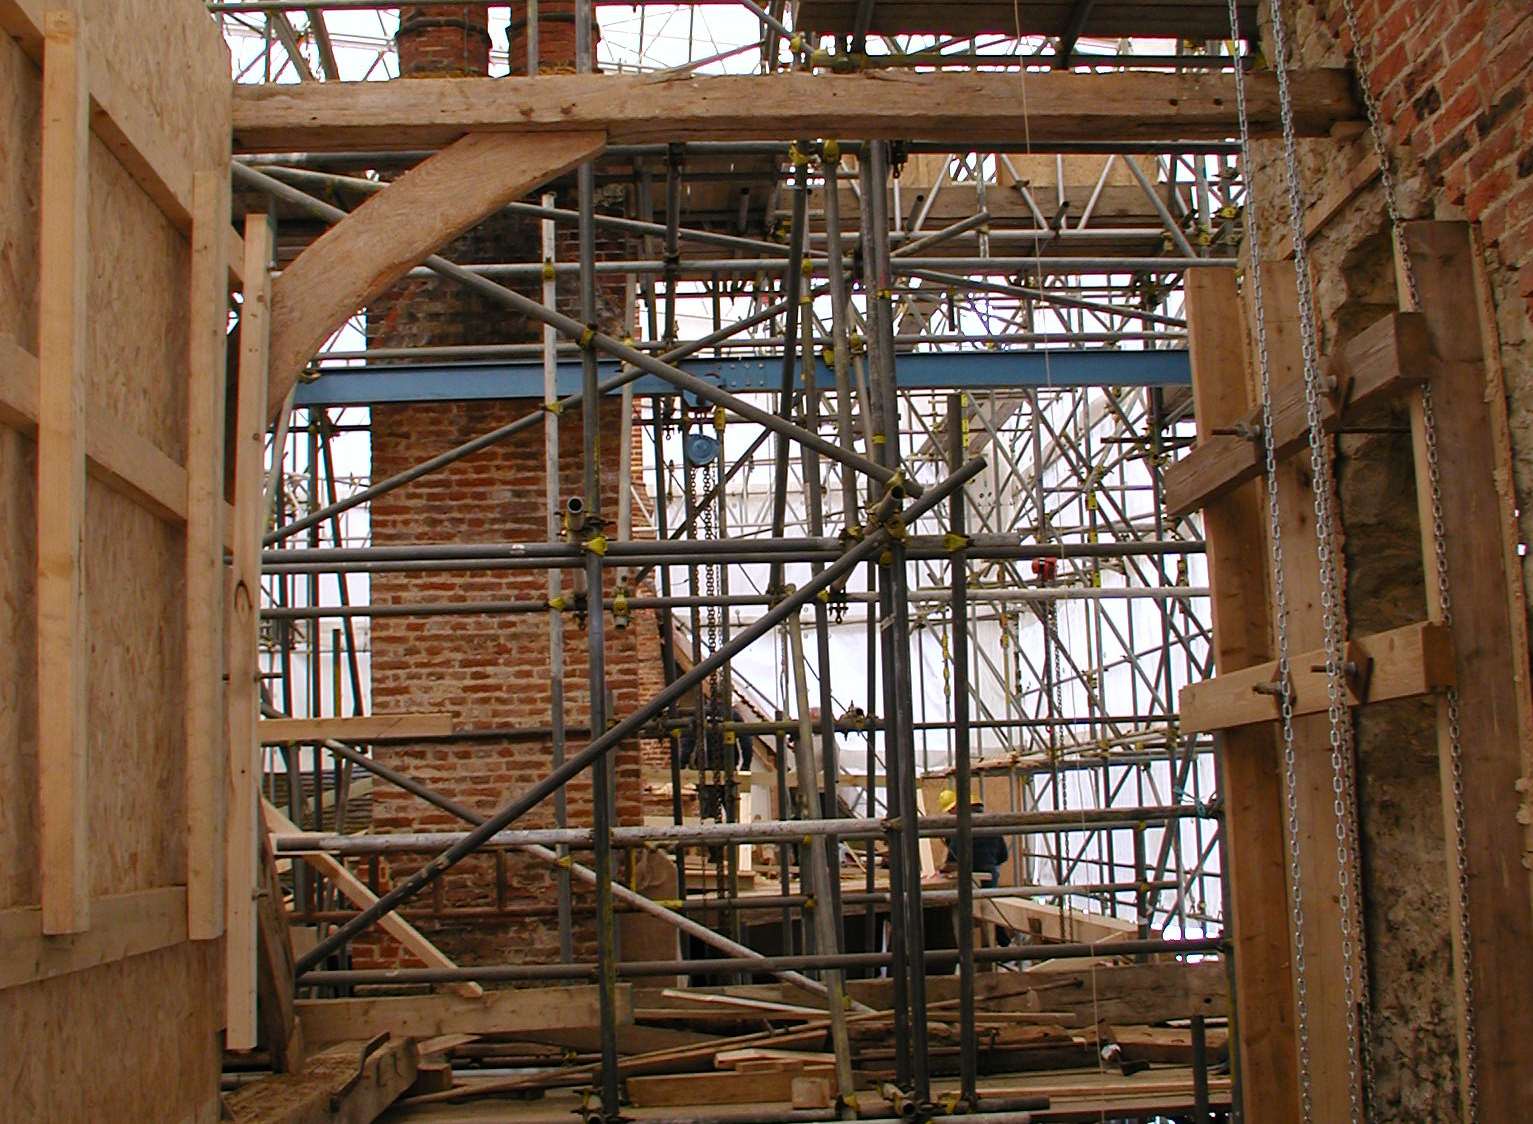 Work to the south east quarter of Ightham Mote took place